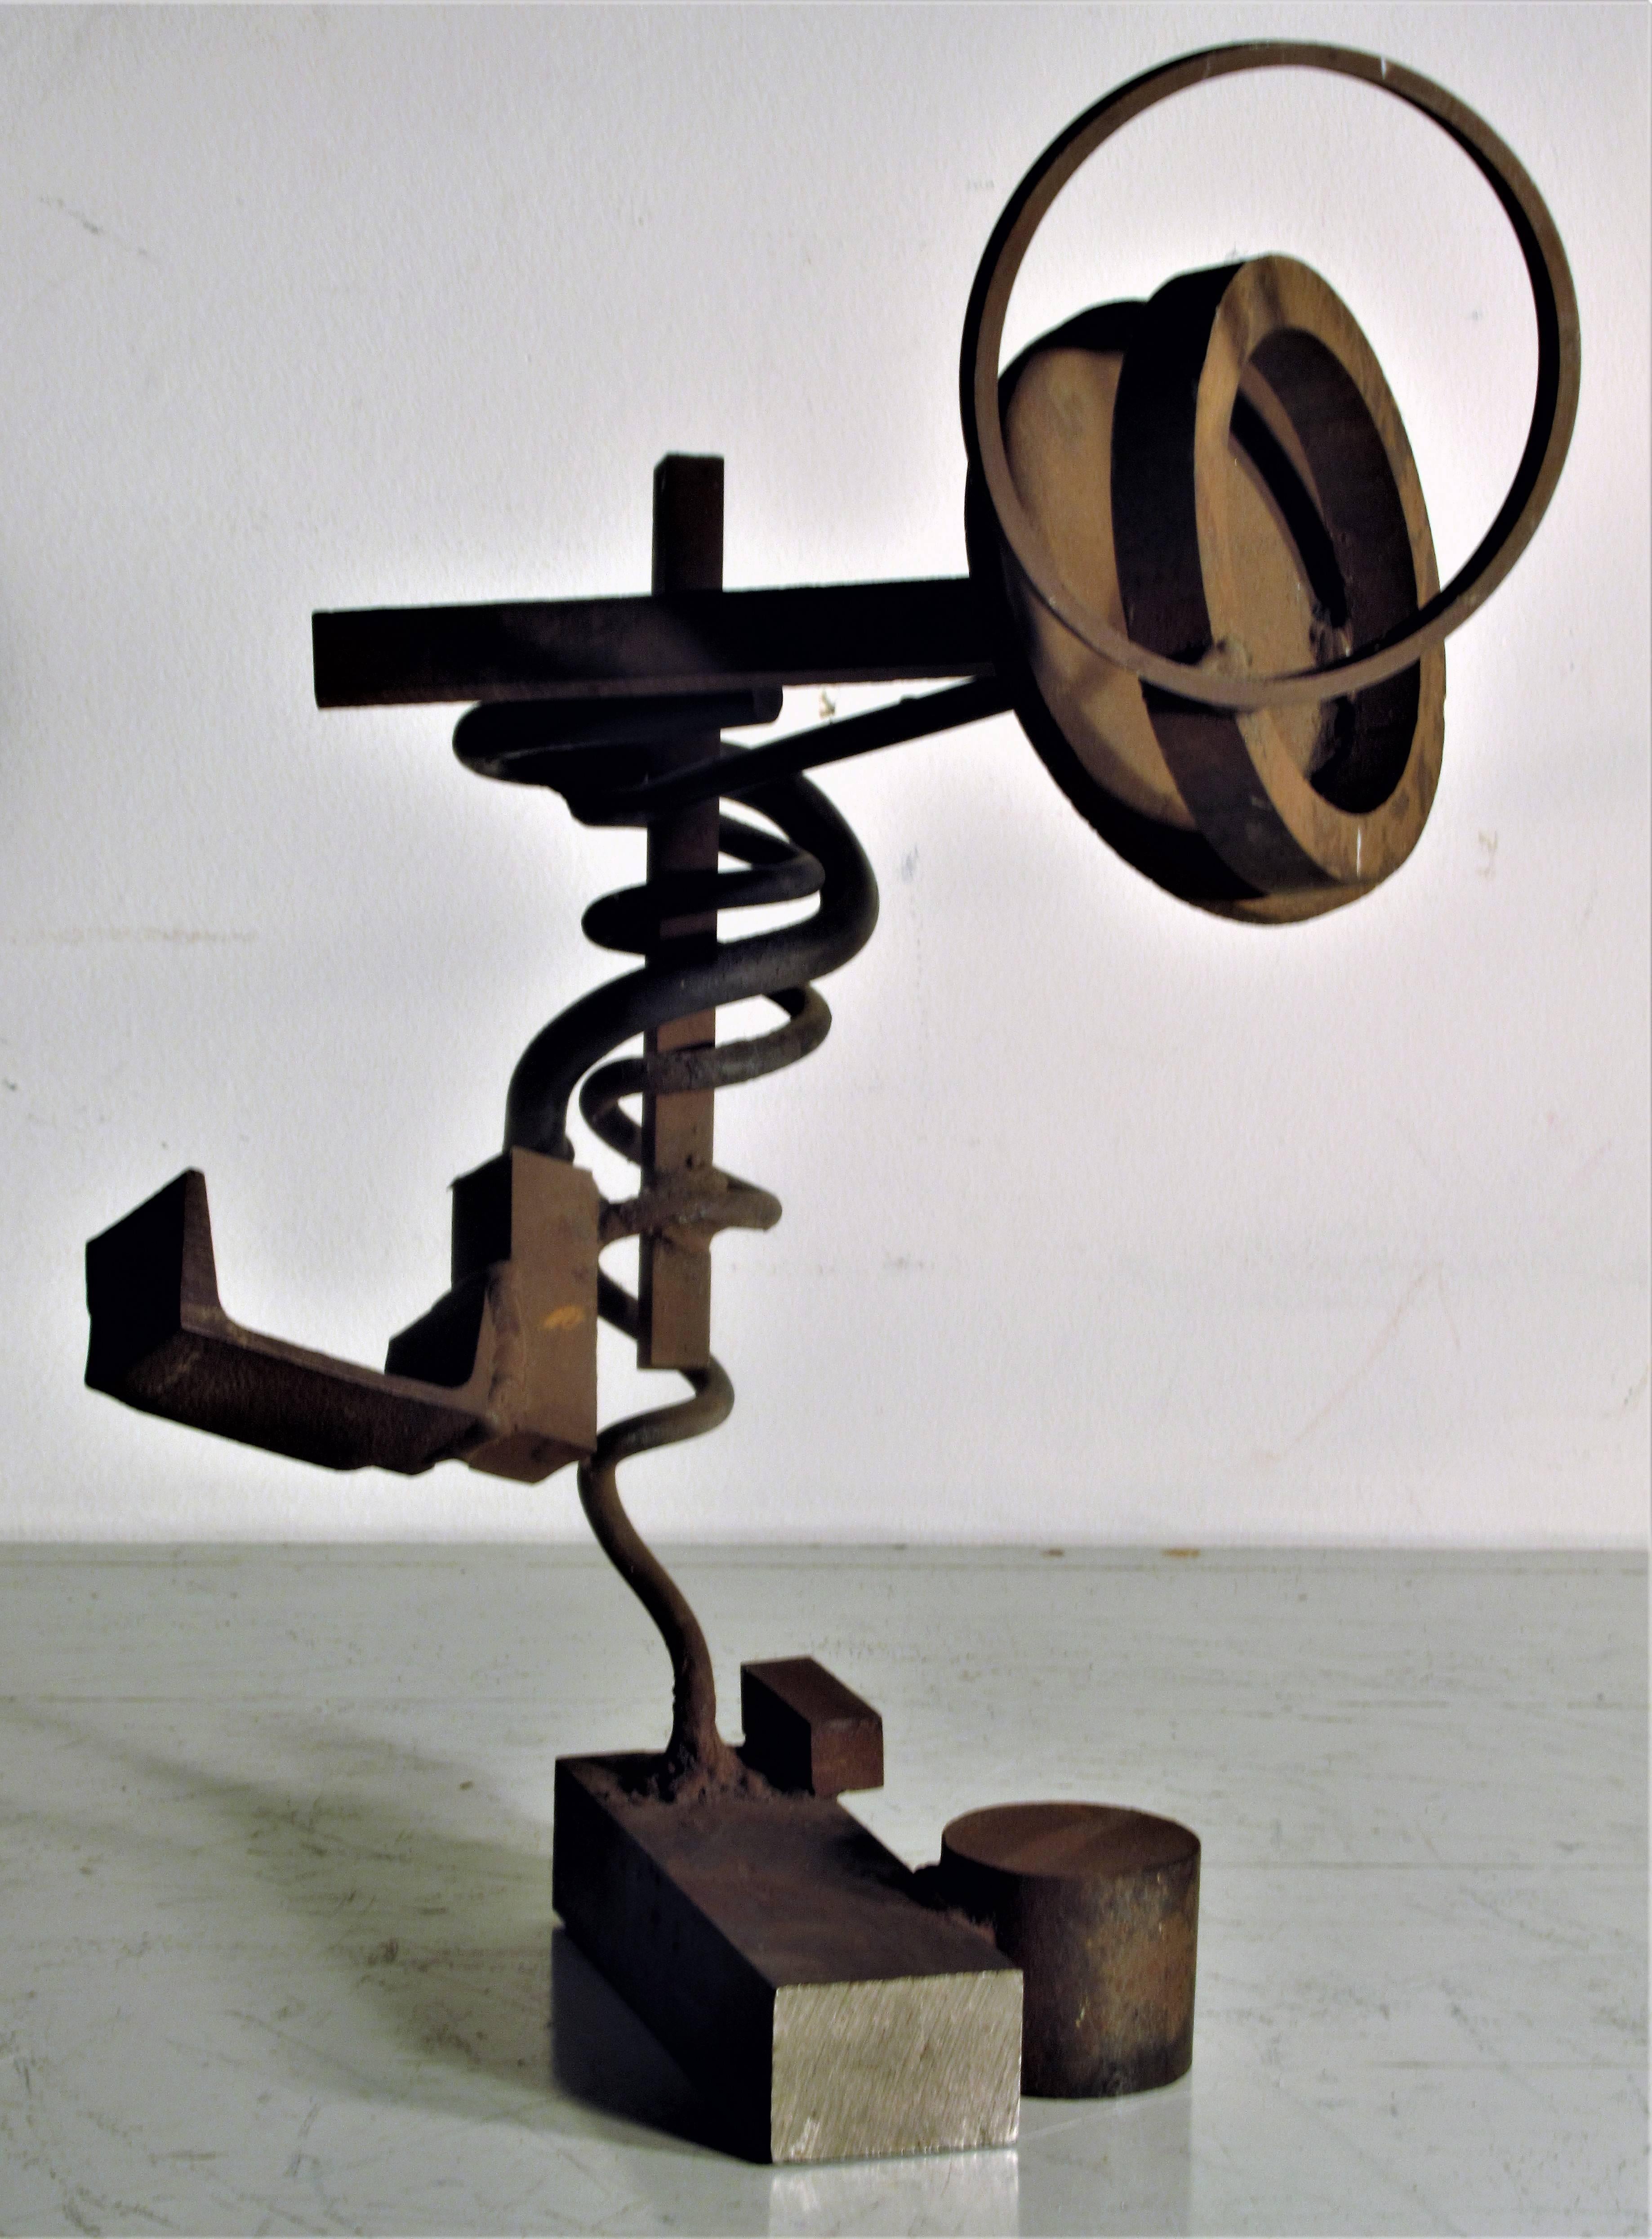   Steel Construction Sculpture by William Sellers 1